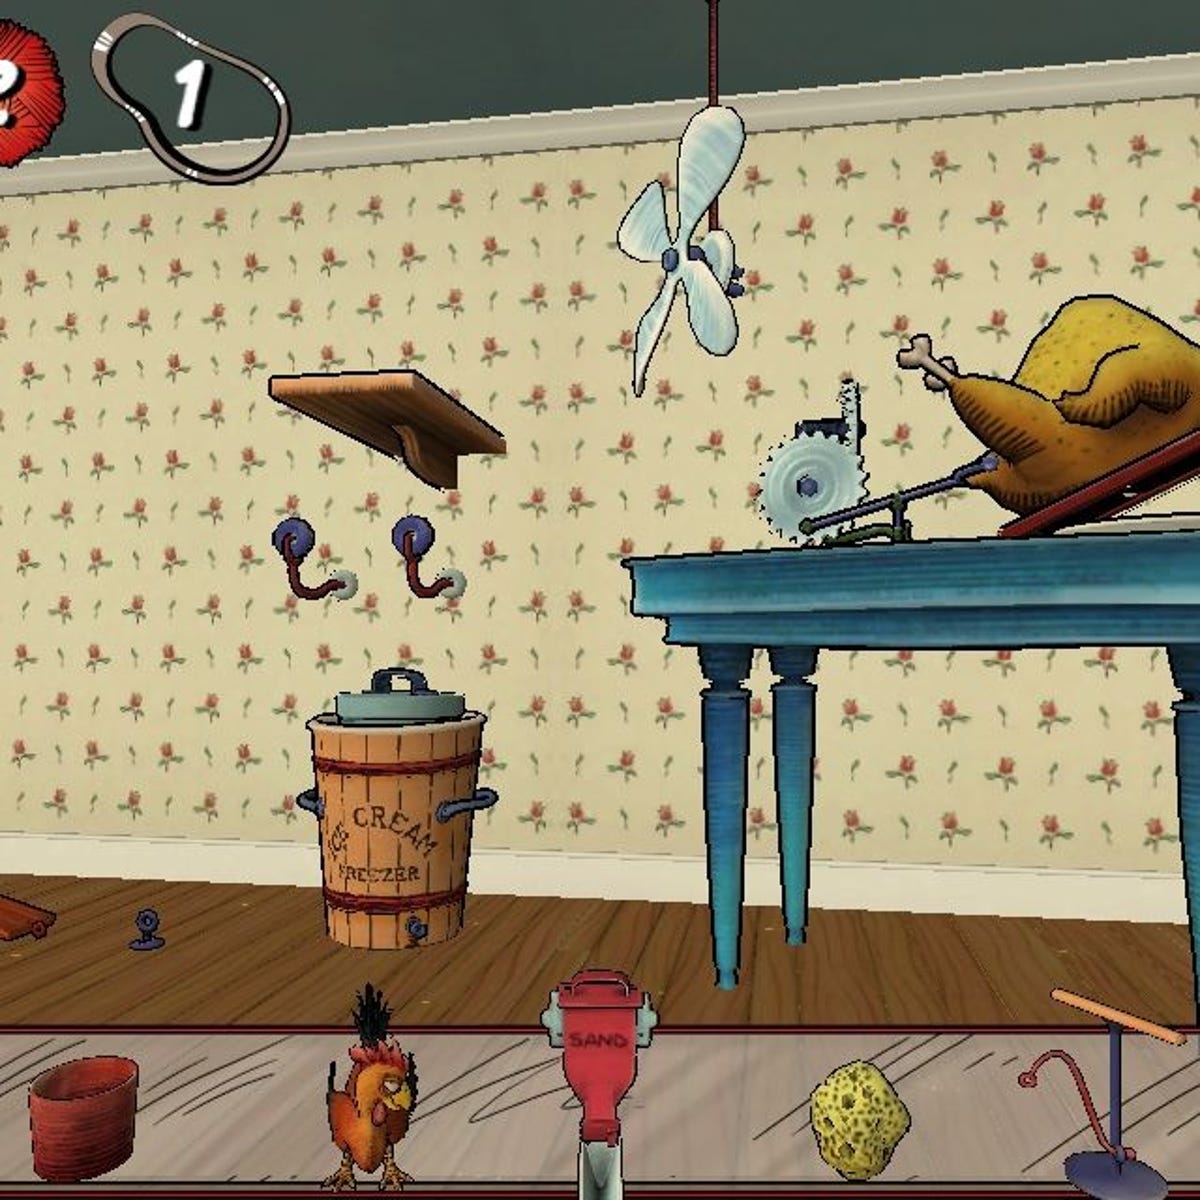 Official Rube Goldberg invention game comes to iOS - CNET